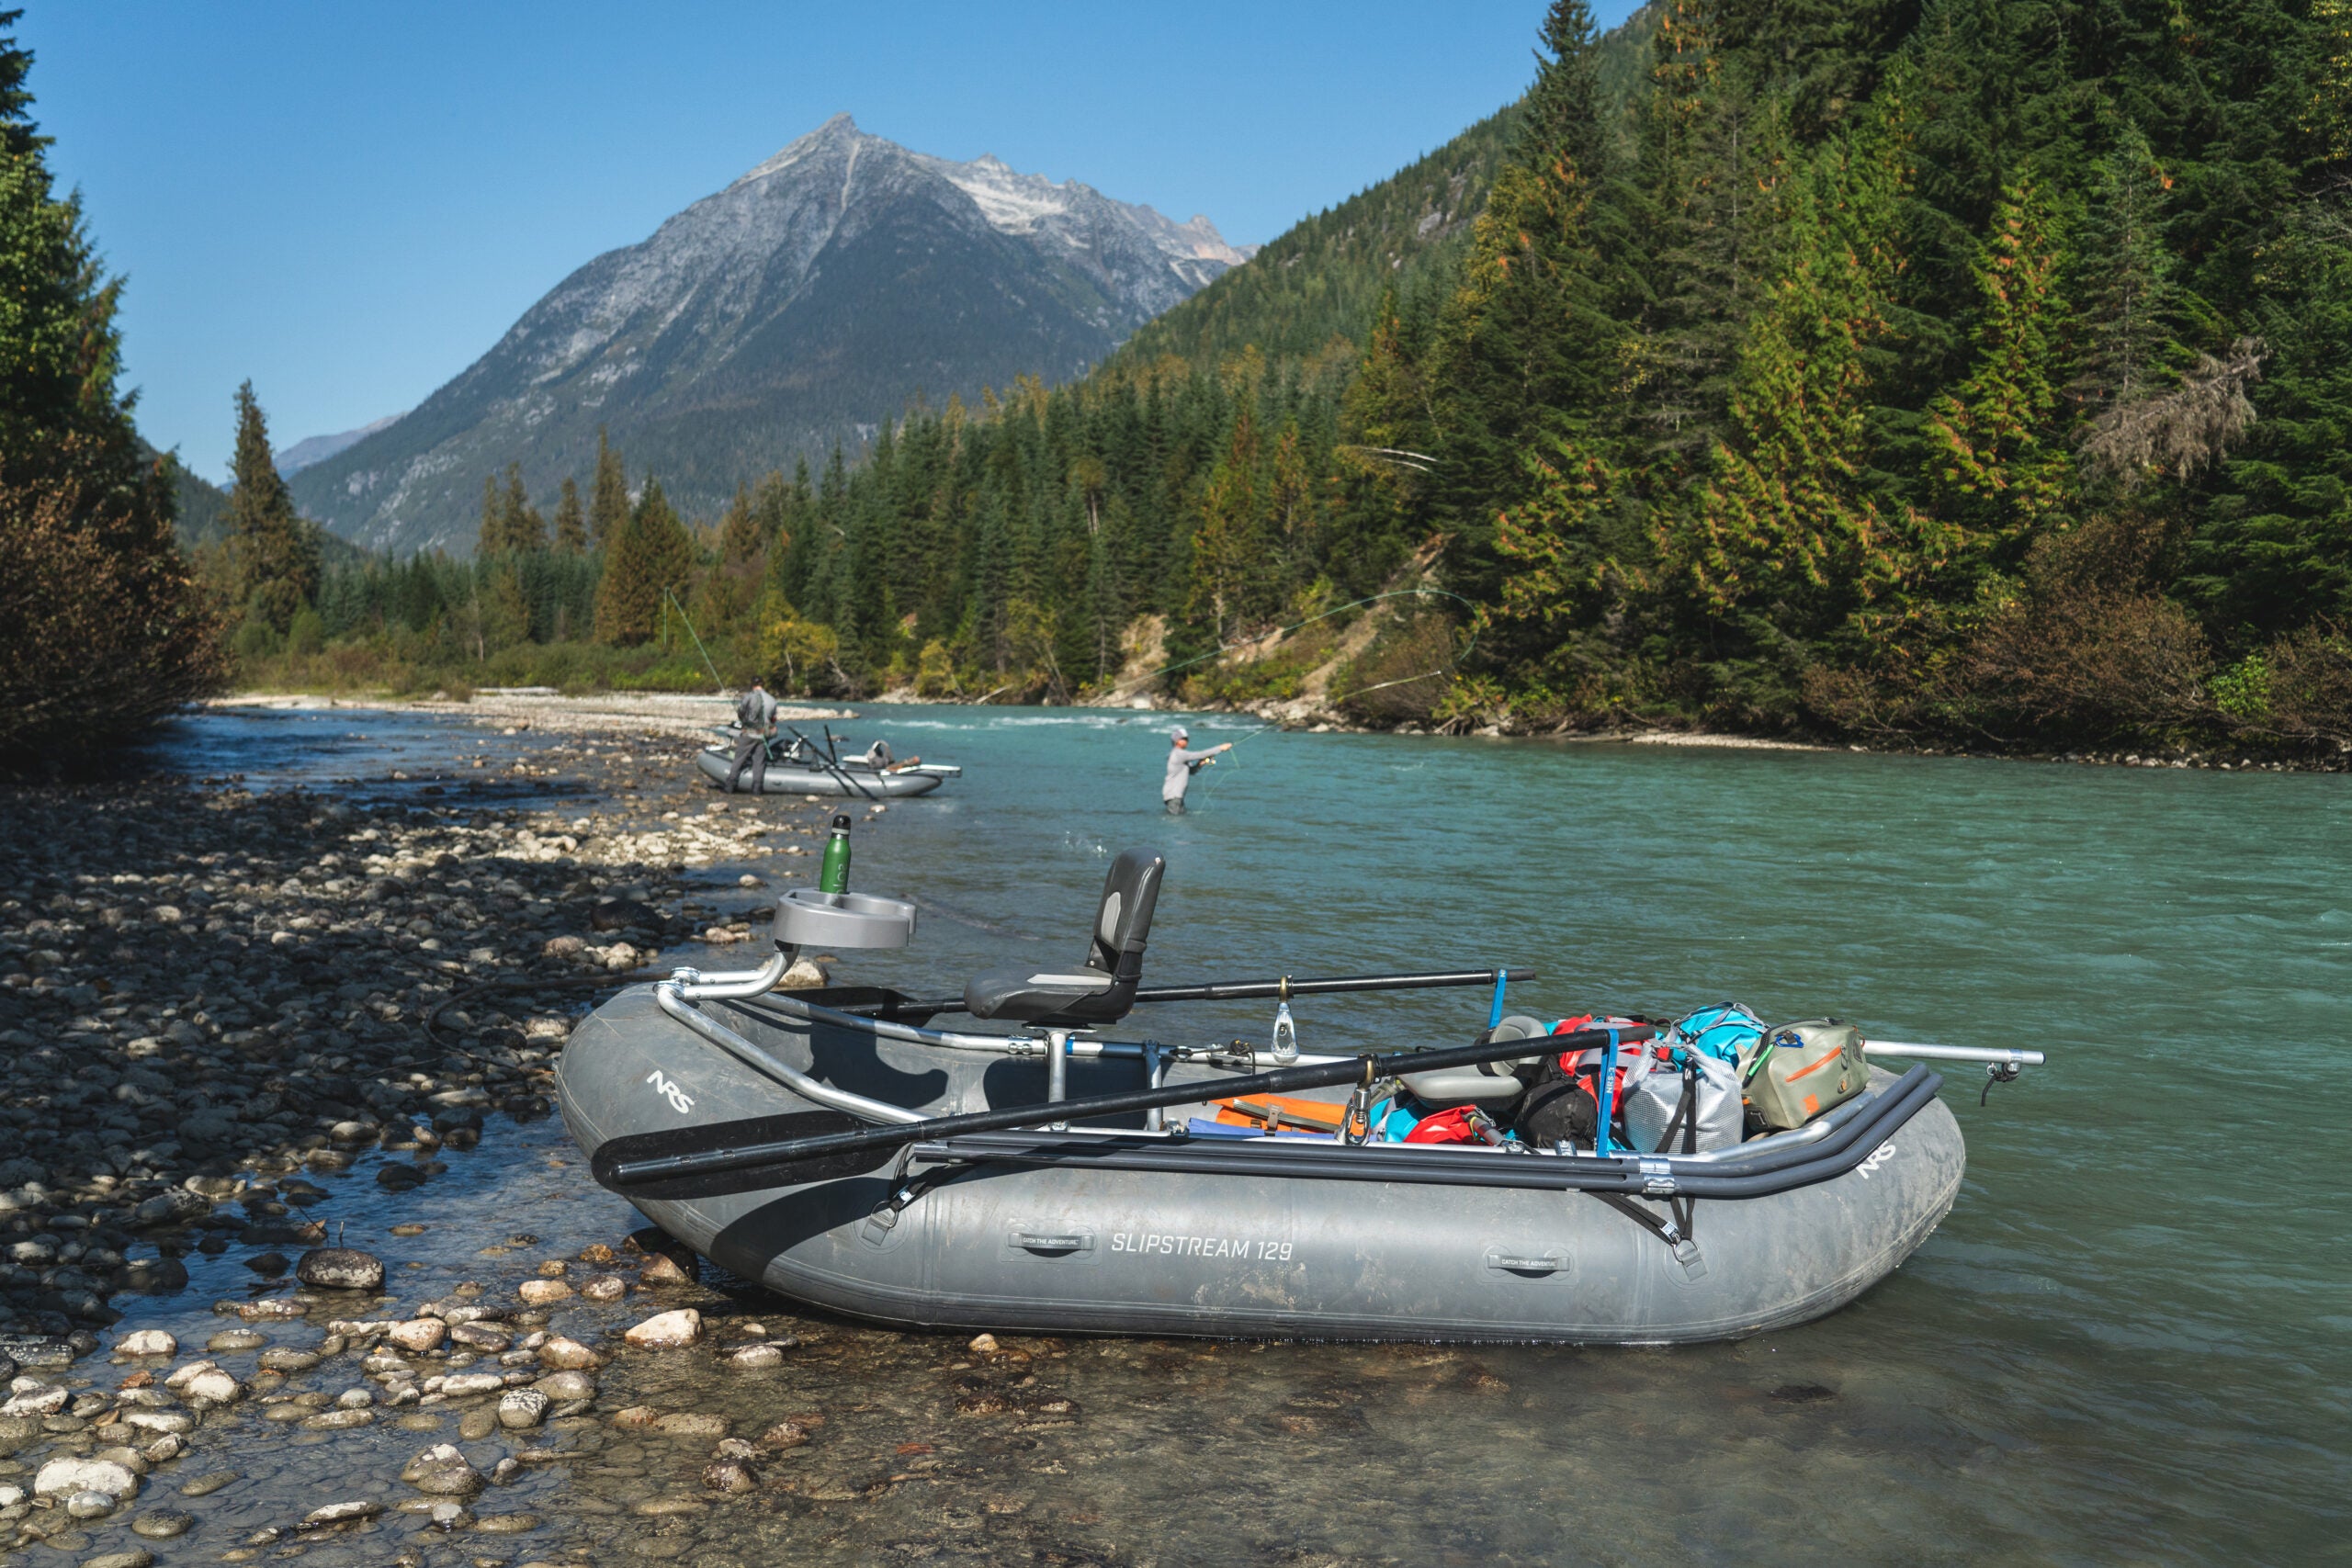 The Slipstream 129 is the perfect fishing raft for small to mid-sized streams and rivers.